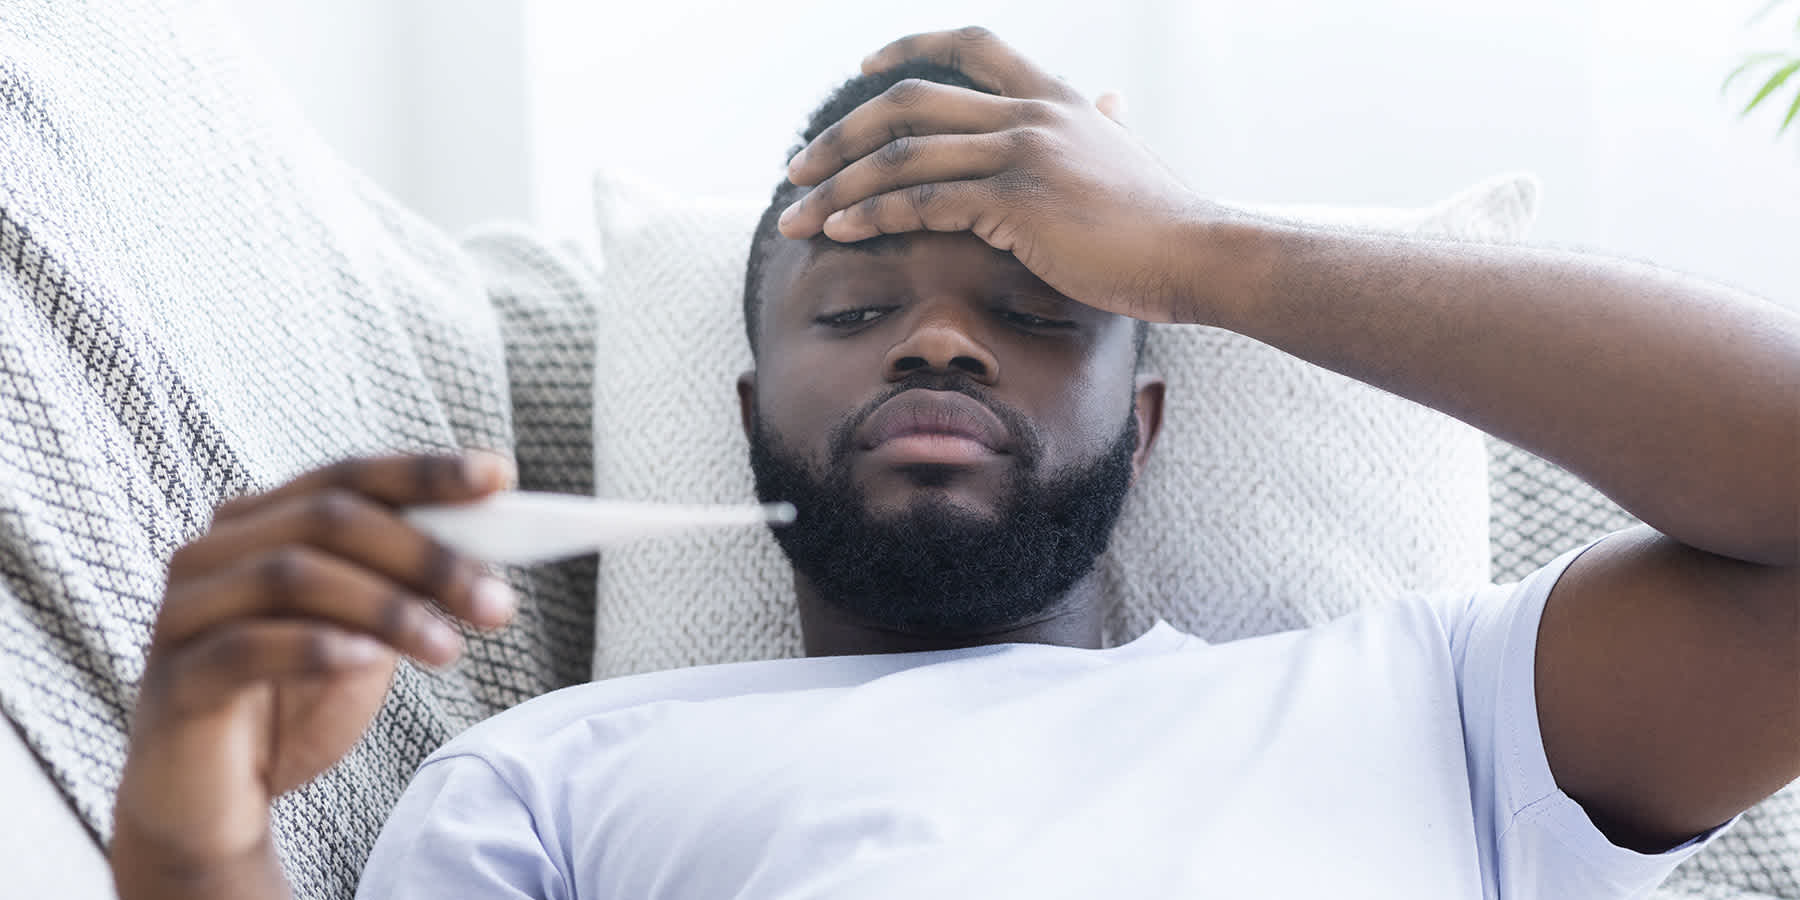 Man with syphilis symptoms lying down while experiencing fever and looking at a thermometer 